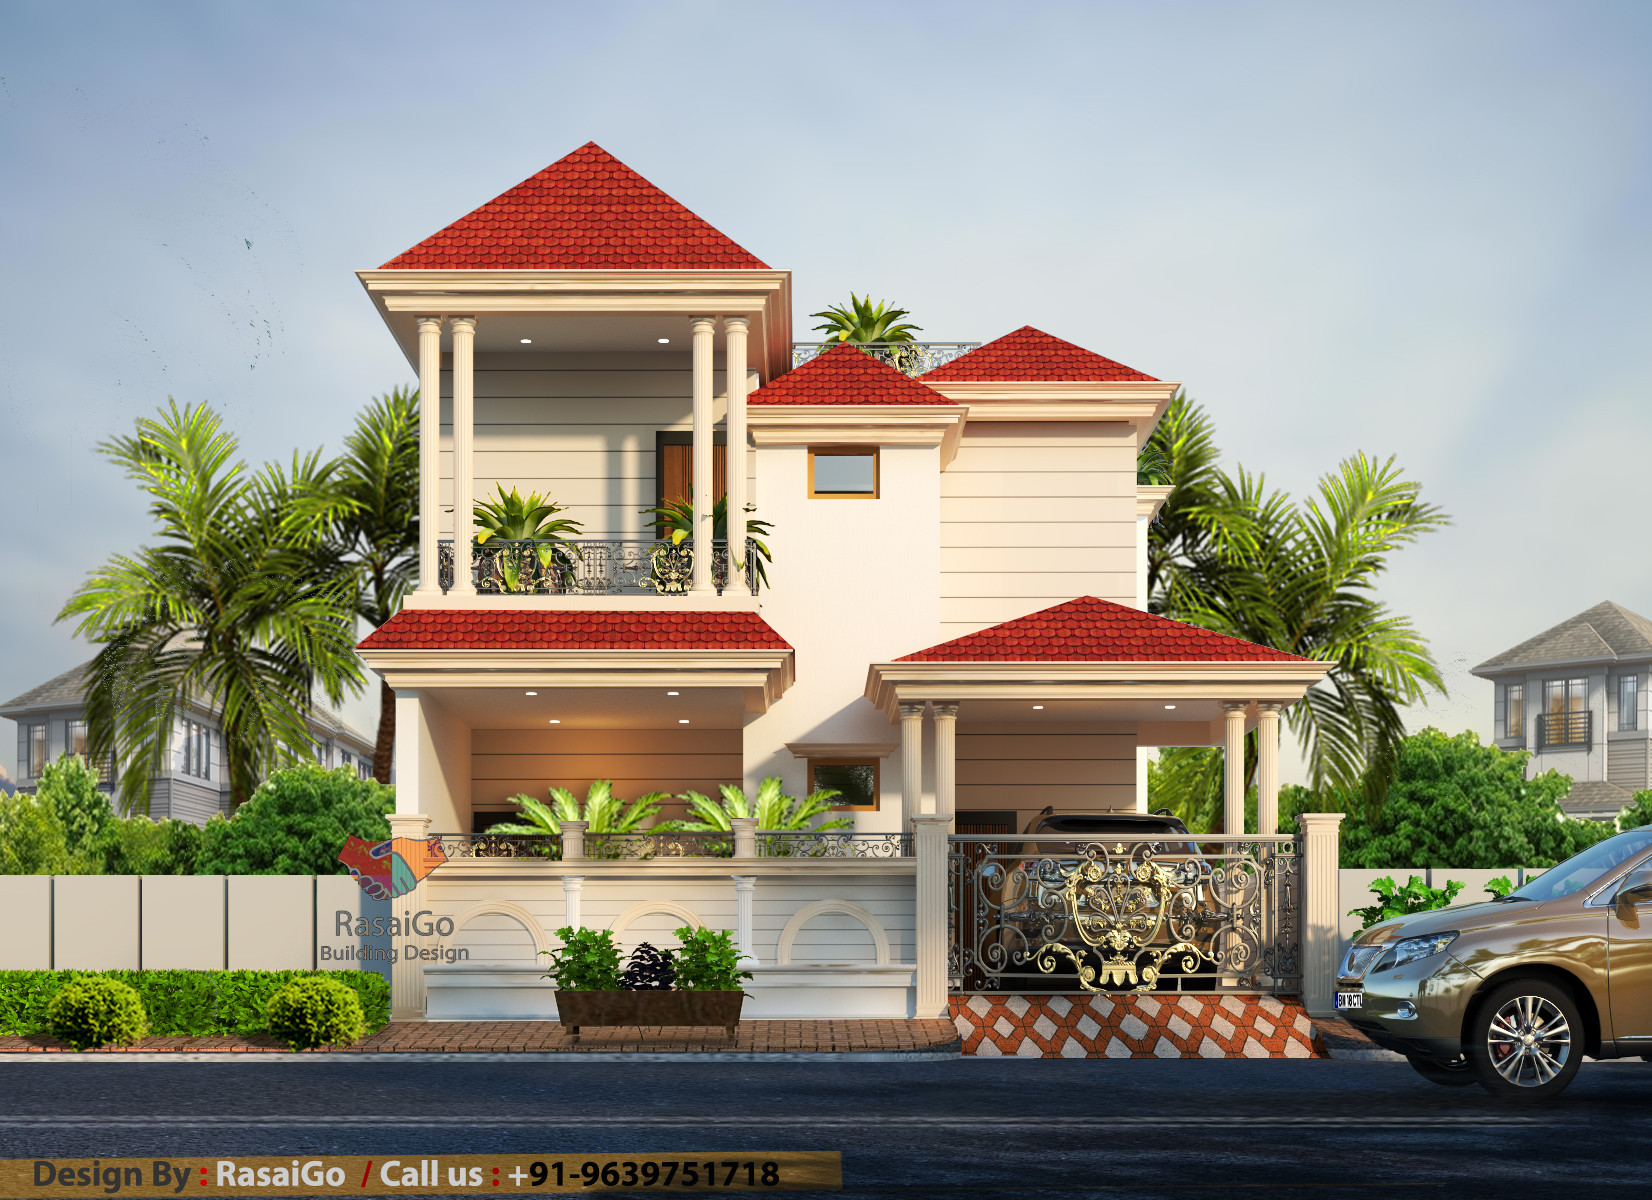 design of house front view